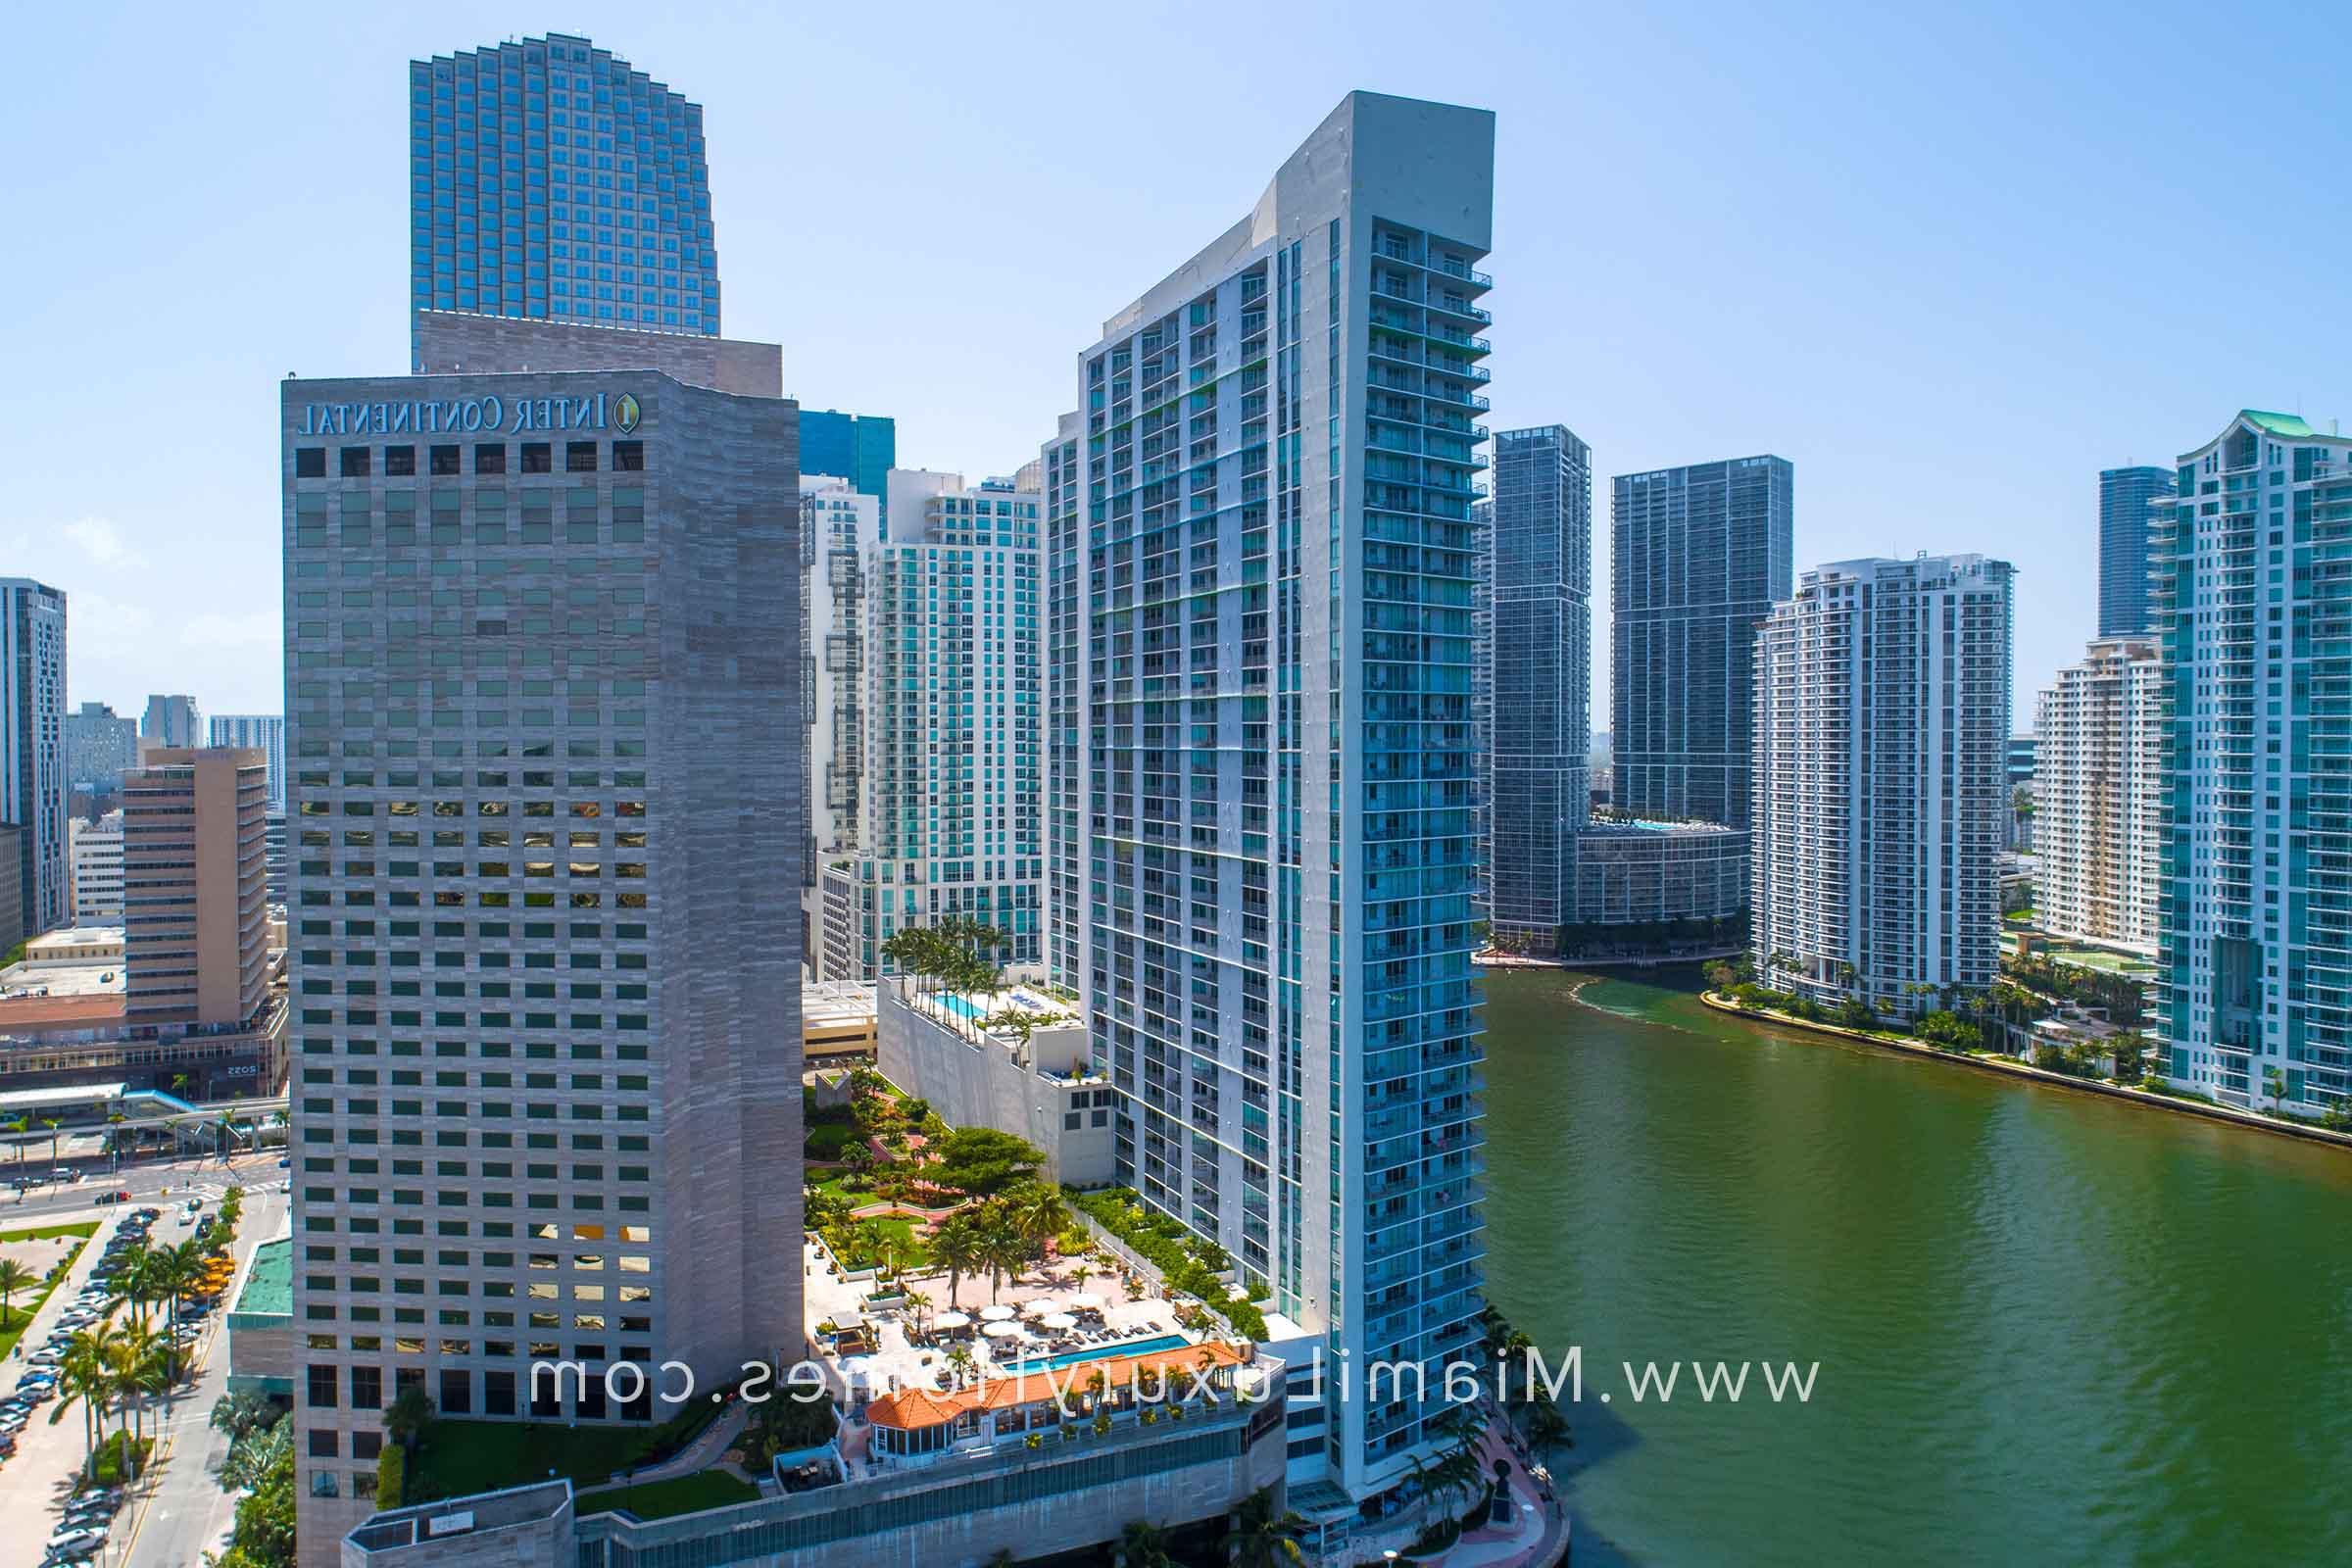 One Miami Condos in Downtown